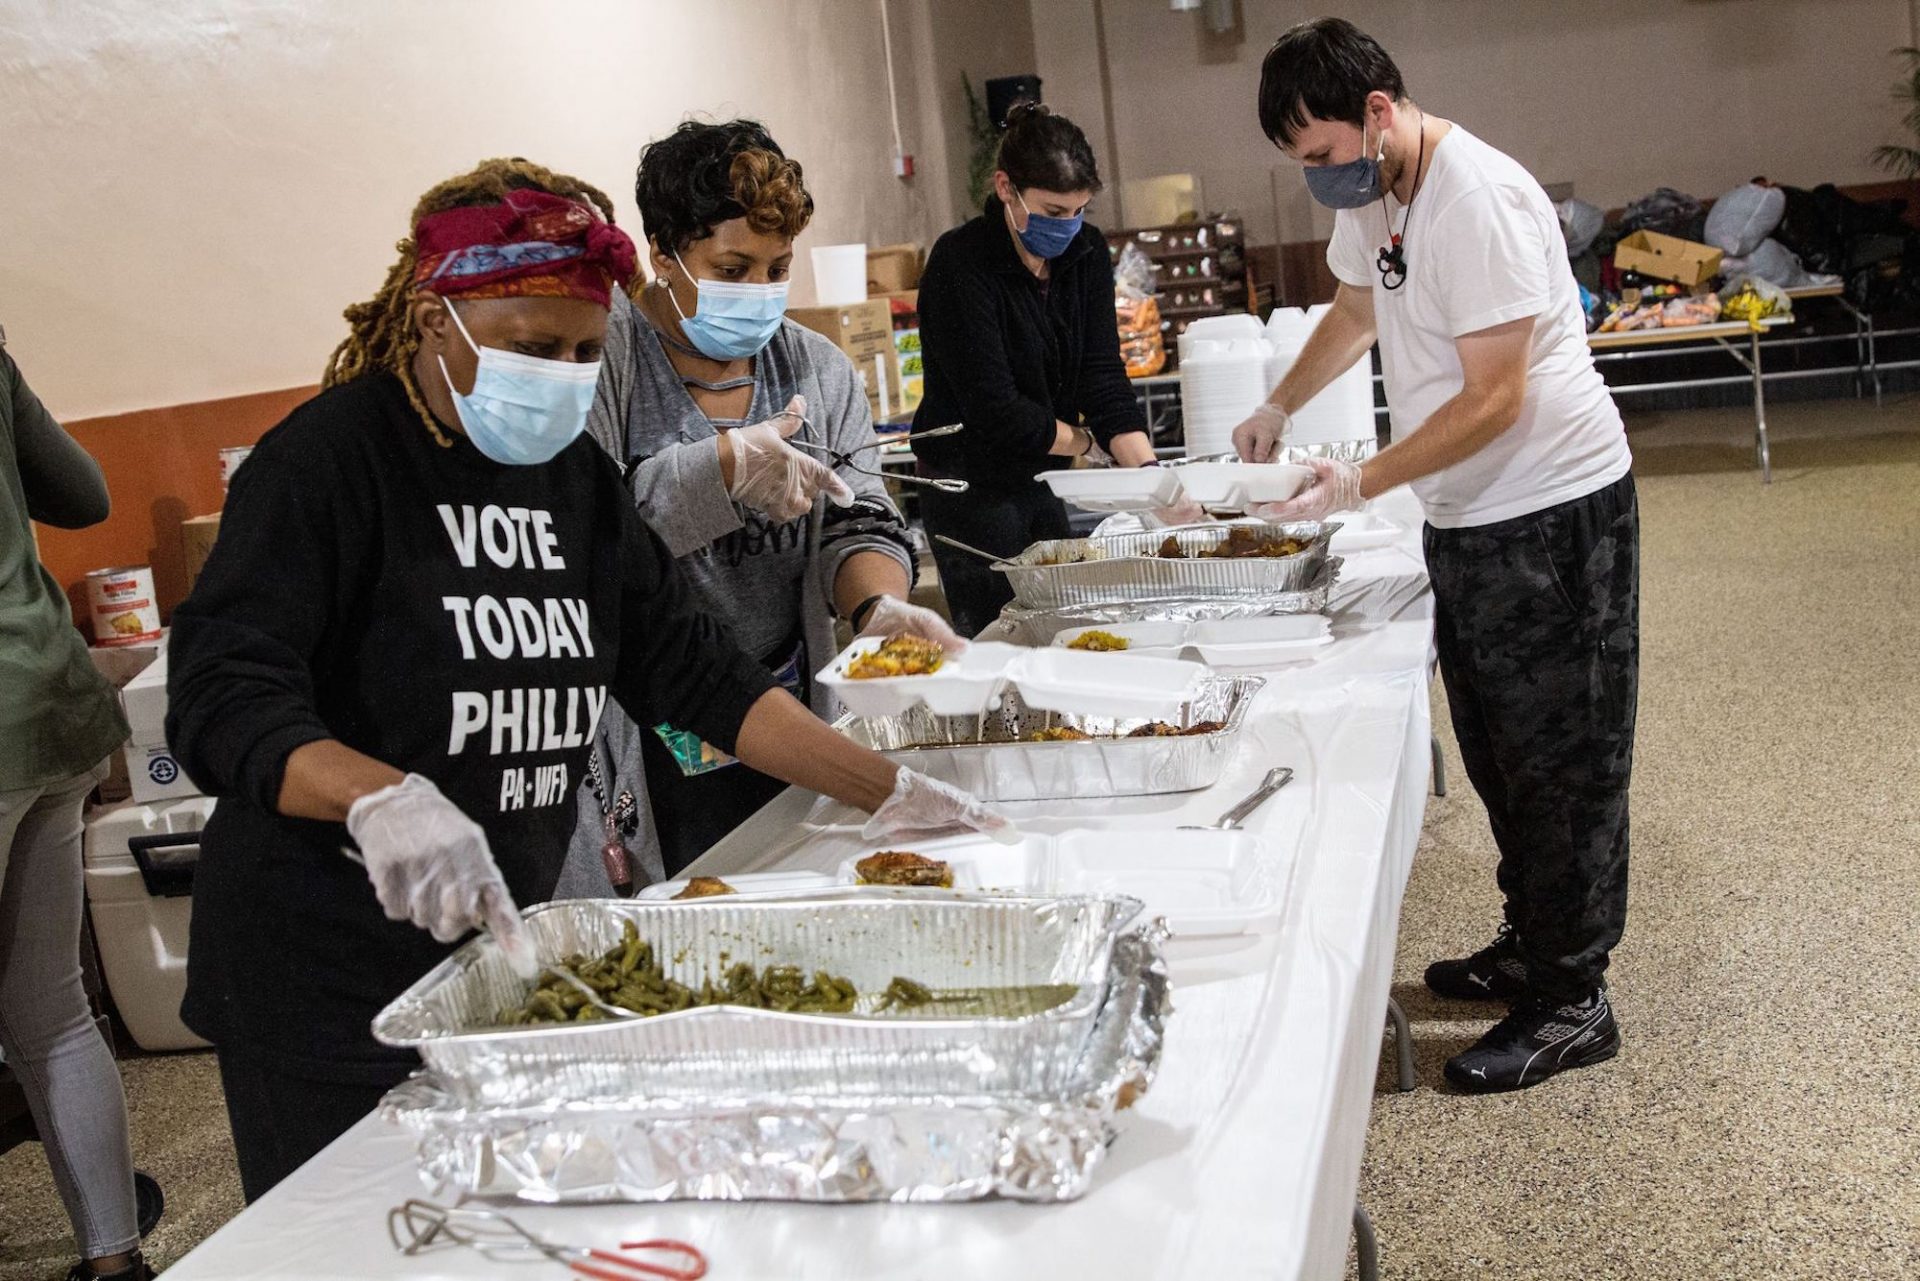 Volunteers at the Chosen 300 Ministries prepare meals for the needy on Spring Garden Street.